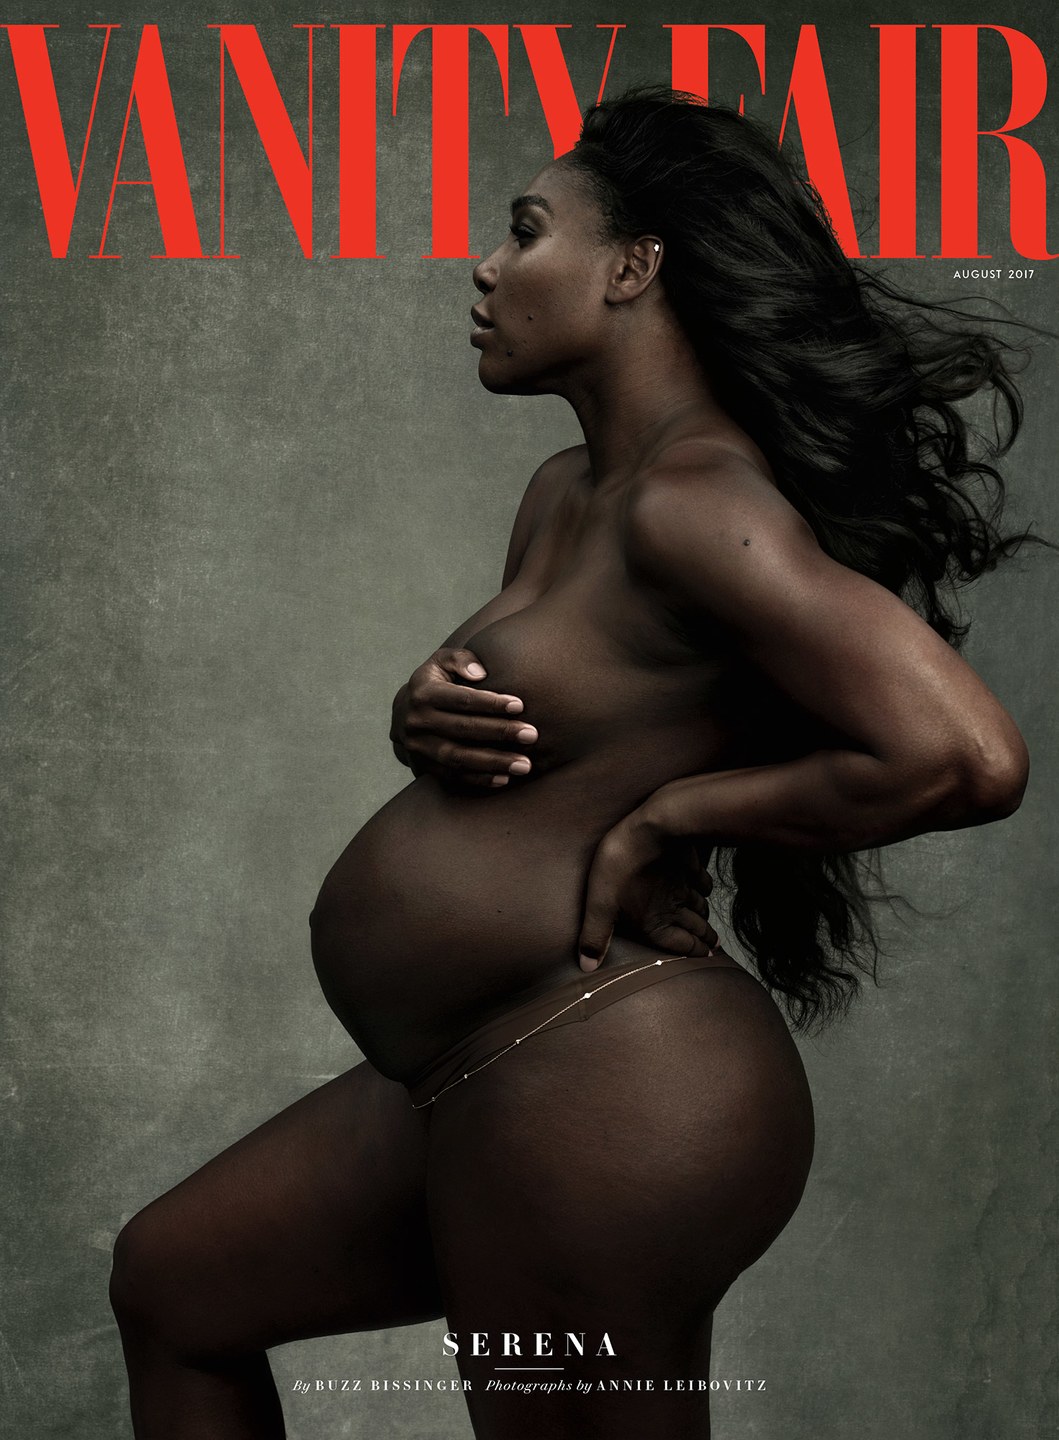 Serena Williams Covers Vanity Fair Magazine August issue Nude with her Baby Bump 